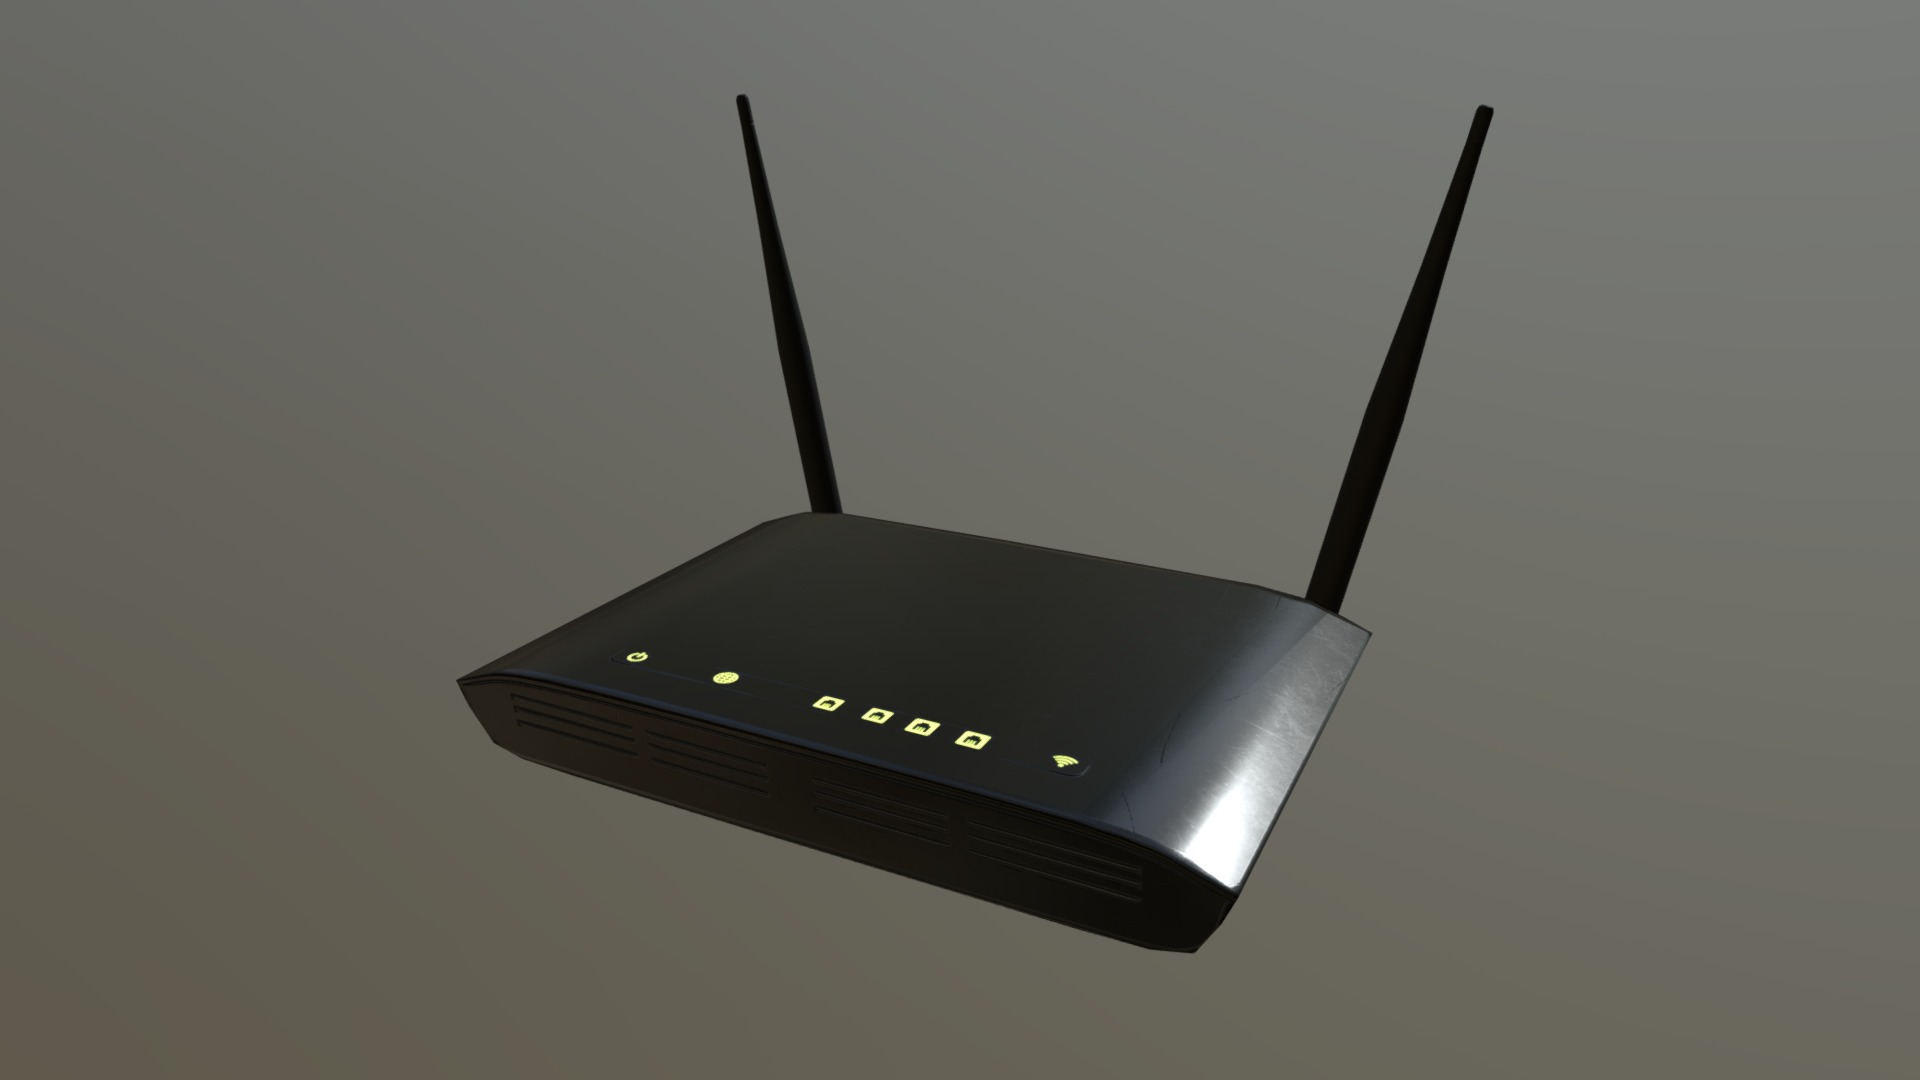 3D Low Poly VR AR Model of a Router WiFi

The model has 3 Levels of Details (LOD)

LOD_00 &ndash;&gt; Vertices: 1112 Faces: 1006 Tris: 2092 LOD_01 &ndash;&gt; Vertices: 298 Faces: 502 Tris: 532 LOD_02 &ndash;&gt; Vertices: 159 Faces: 250 Tris: 266

With PBR materials, textures and non-overlapping UV layout map.

All textures are included in the package (plus textures 4K and OBJ file for Adobe Dimension). Textures provided: base color, metallic, normal, roughness, AO. Textures for Blender Cycles with normal map - Open GL. UV Layout map and Textures resolution: 2048x2048px and 1024x1024px. Unity and Unreal textures are exported with Substance Painter 2018 and included.

Scale units meters in Blender in real world dimension and Unreal scale (file fbx). Made and rendering in Blender v2.79 with Cycles. Thanks freepik.com

Enjoy! - Router WiFi - Buy Royalty Free 3D model by 3D Skill Up (@3dskillup) 3d model